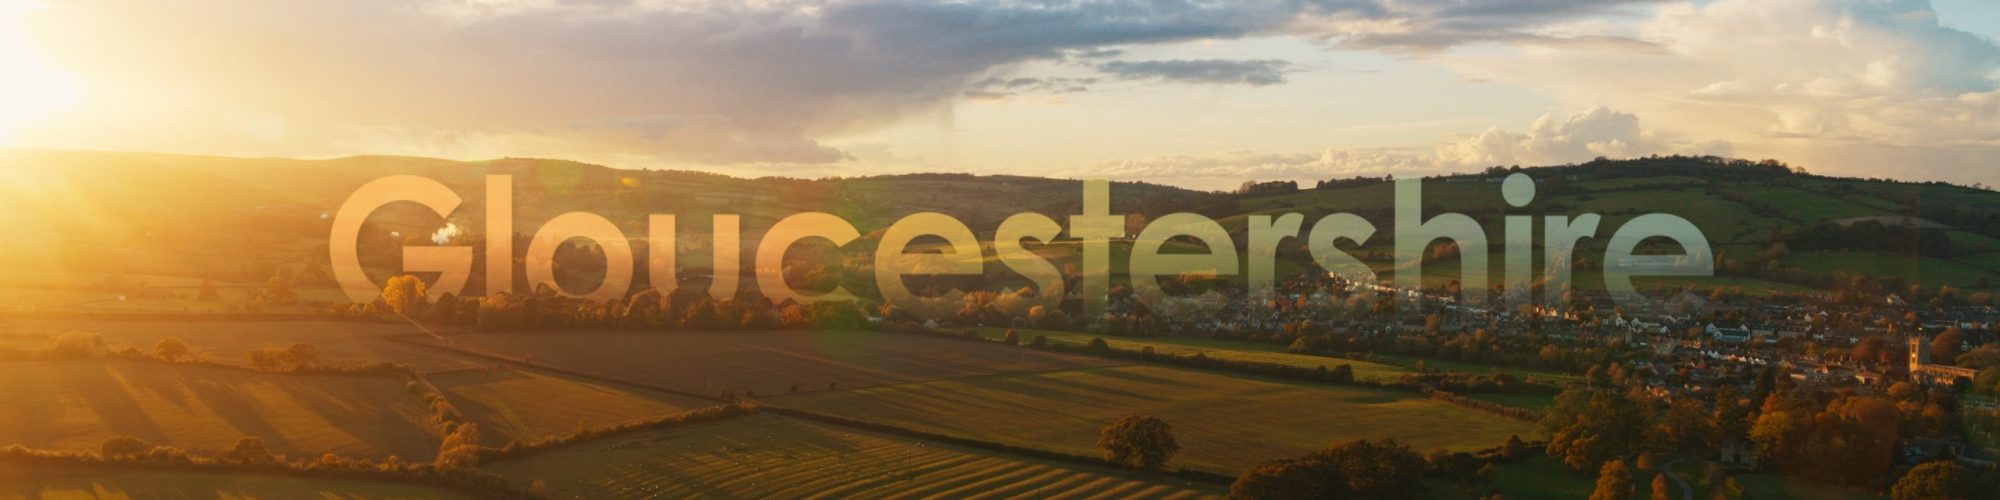 A sunset over open fields with the word Gloucestershire overlaid